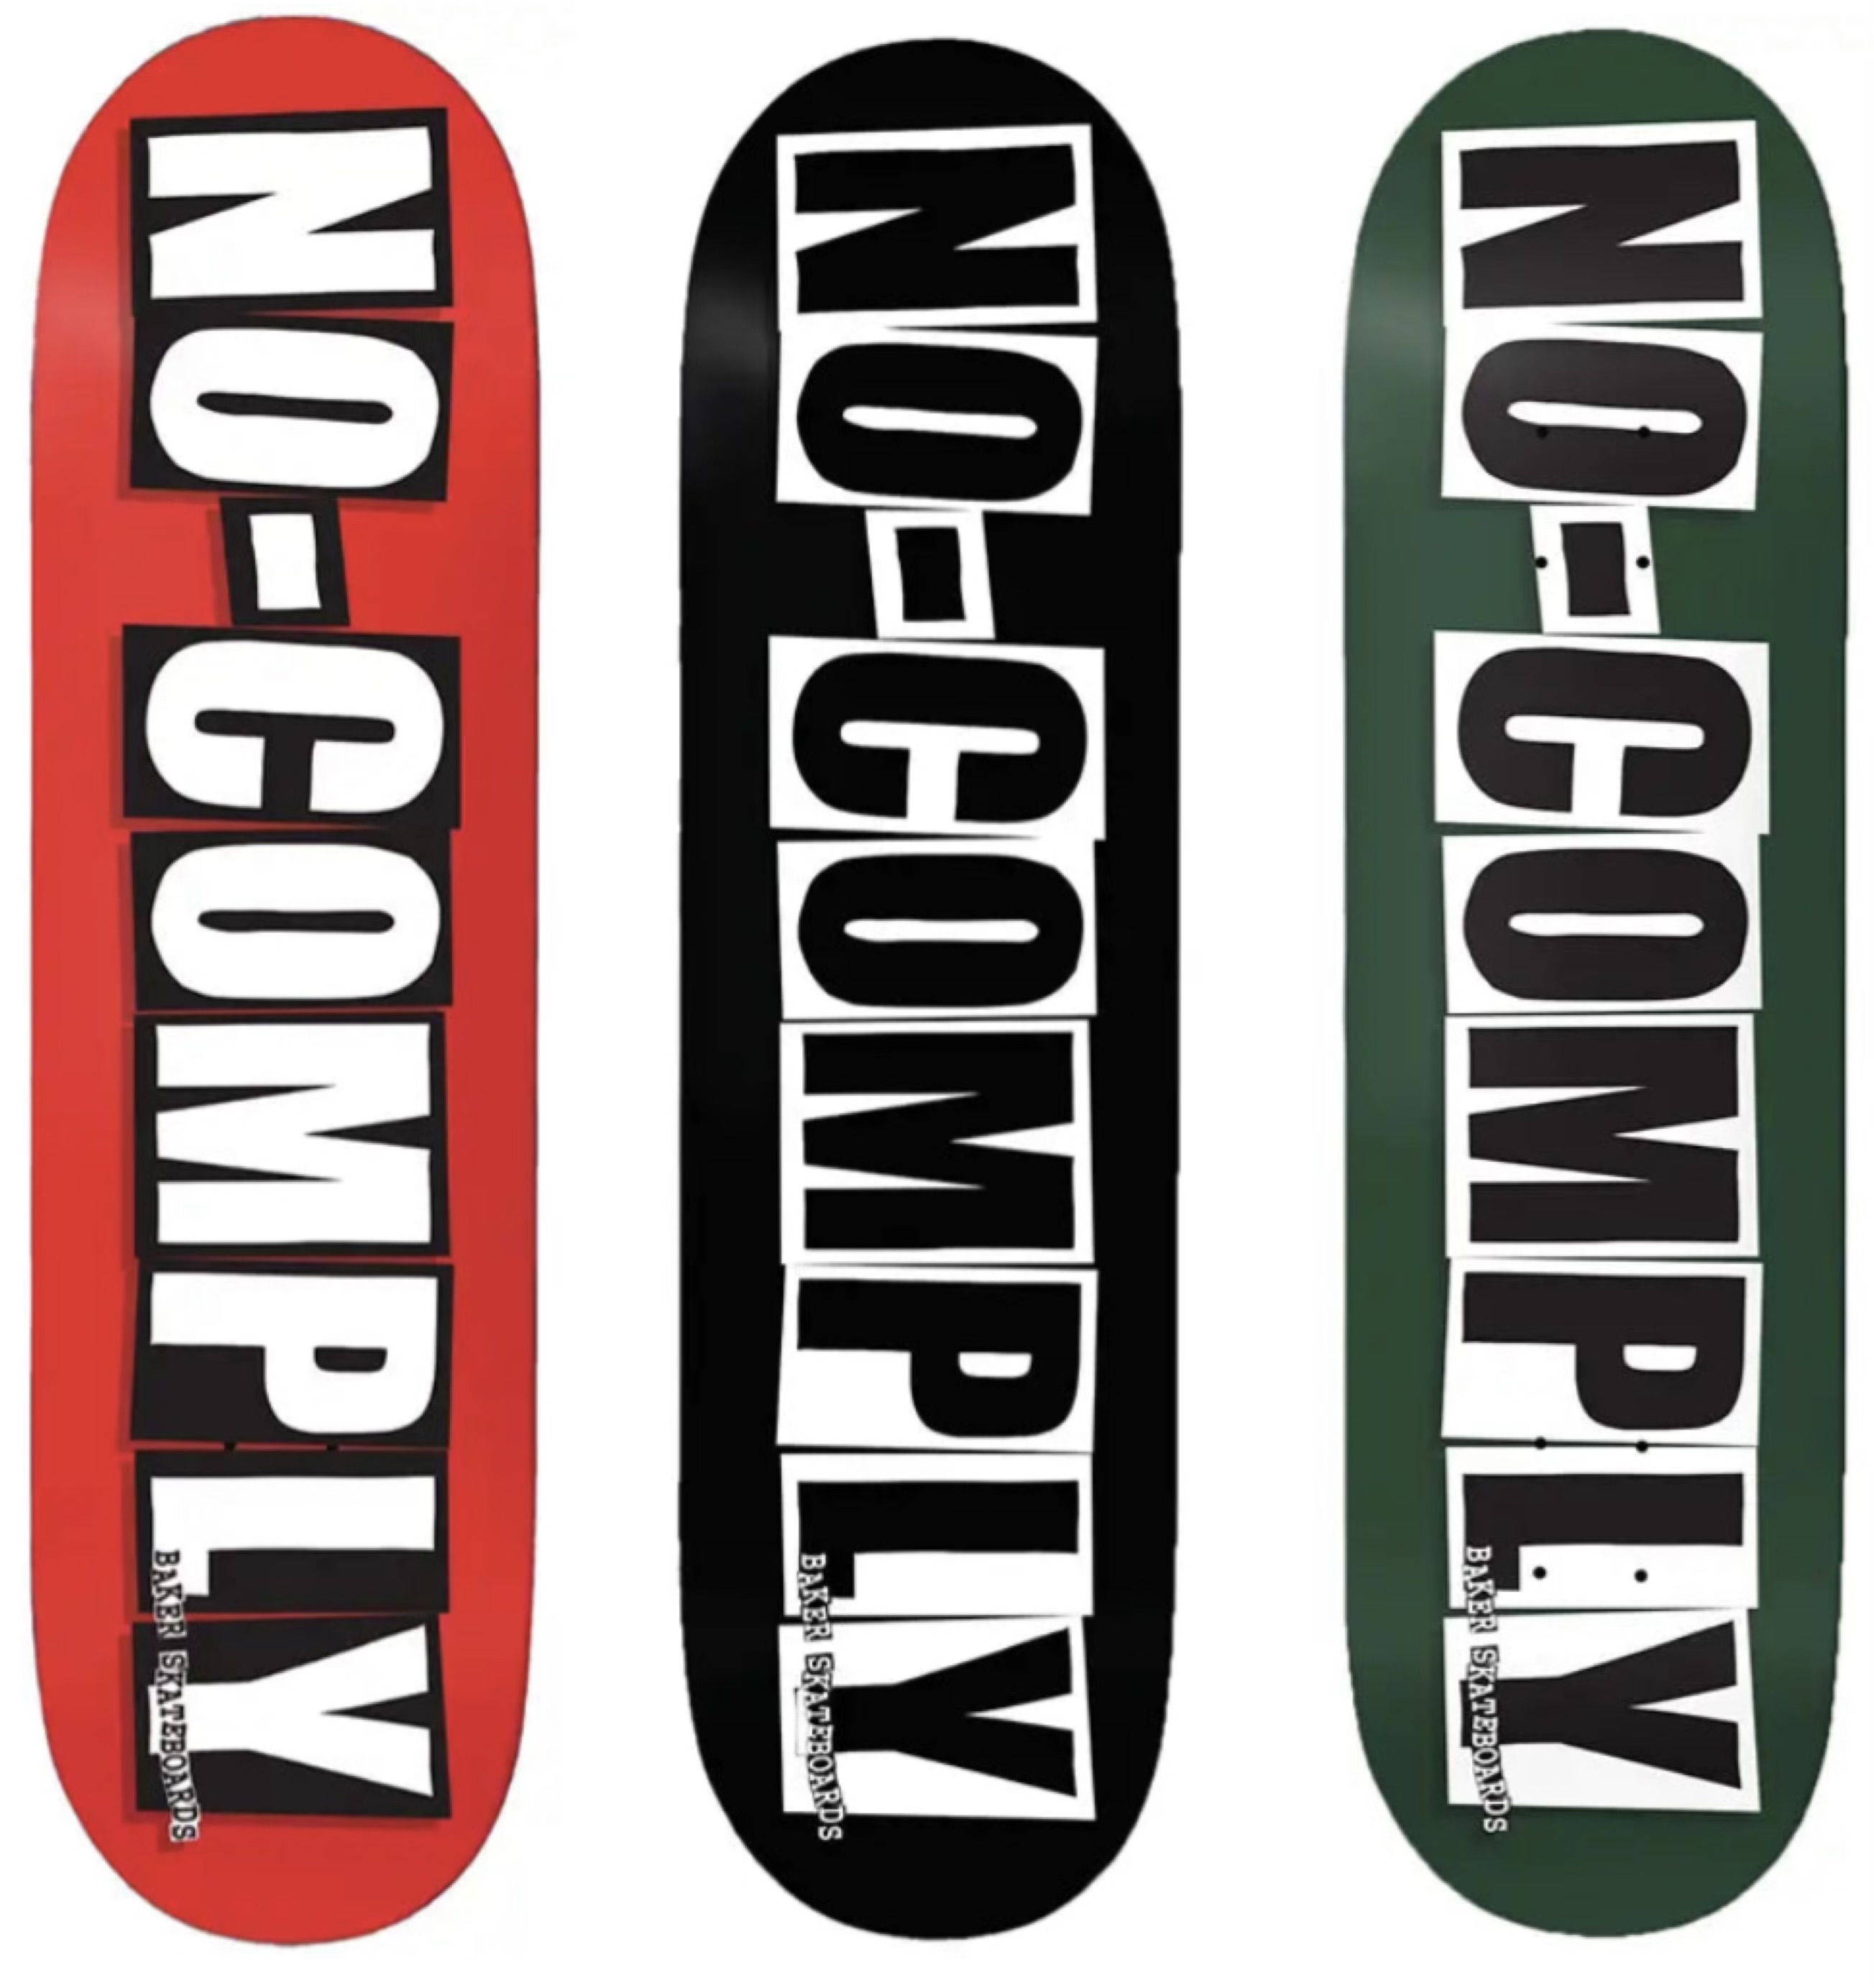 BAKER X NOCOMPLY feature image